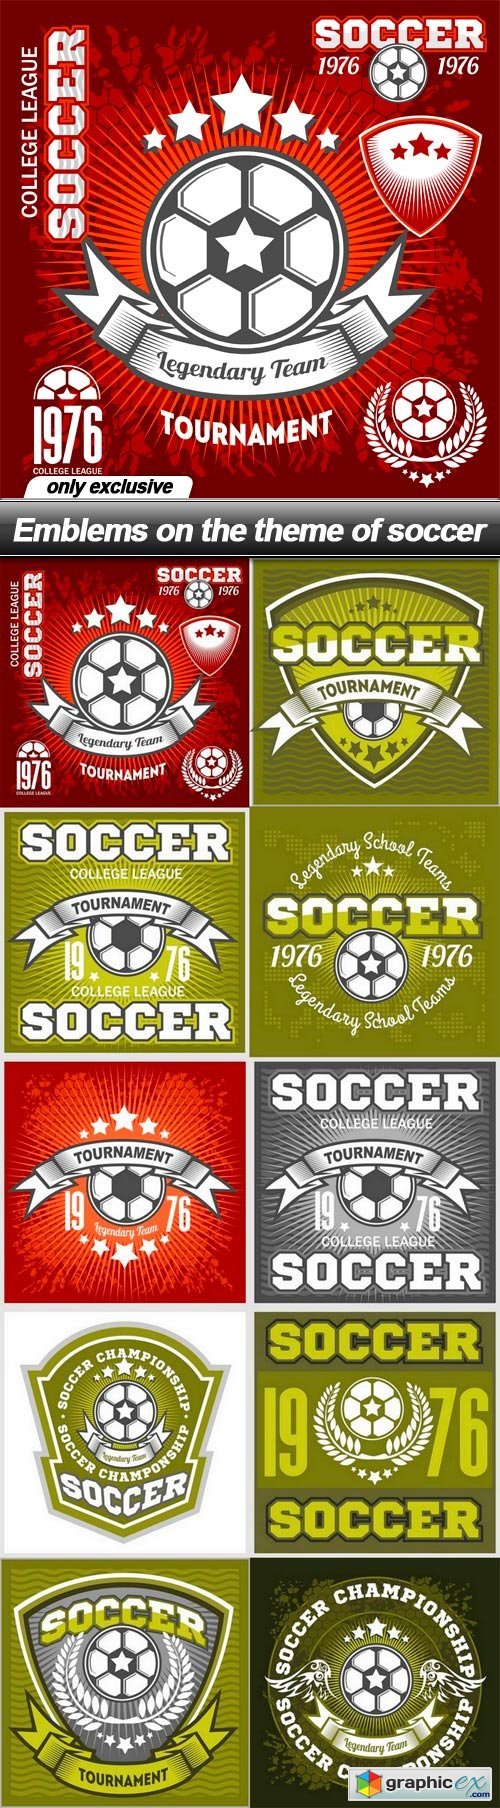 Emblems on the theme of soccer - 10 EPS